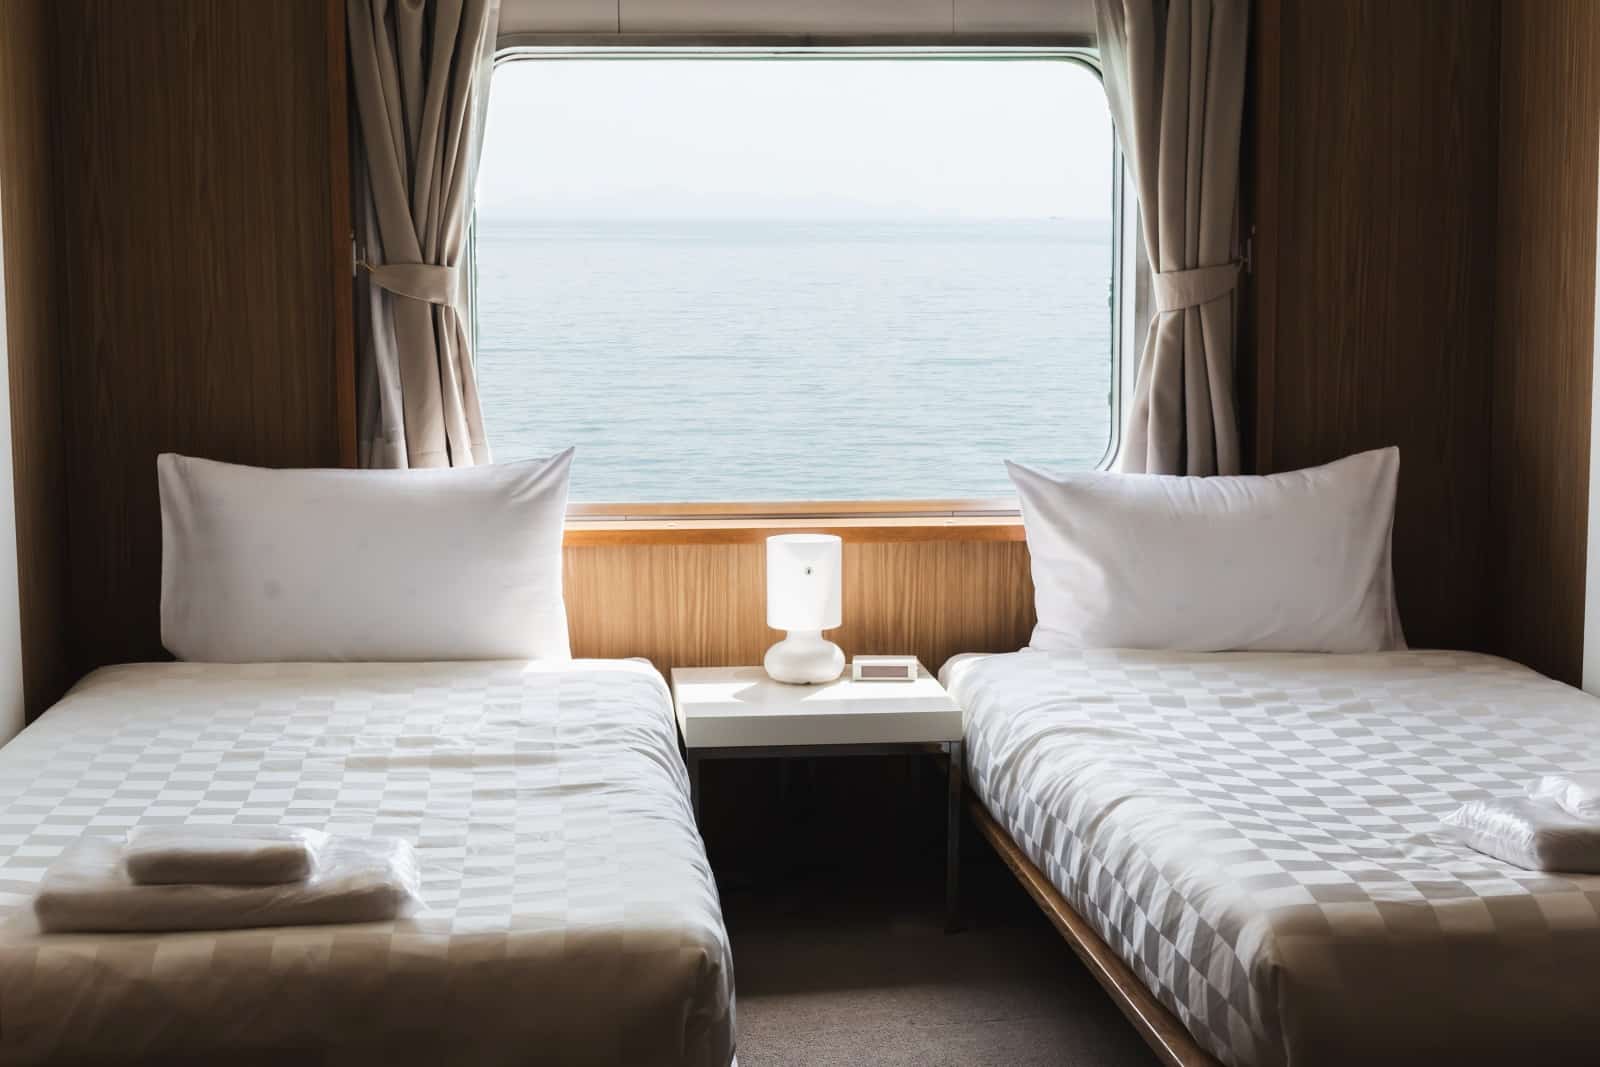 <p><span>When booking your cruise, consider eco-friendly cabin options. Many newer ships offer cabins designed with sustainable materials and equipped with energy-saving features. Choosing these accommodations supports the industry’s move towards greener options.</span></p> <p><strong>Insider’s Tip: </strong><span>Inquire about cabins with eco-certifications or those that utilize sustainable materials and energy-efficient systems.</span></p>